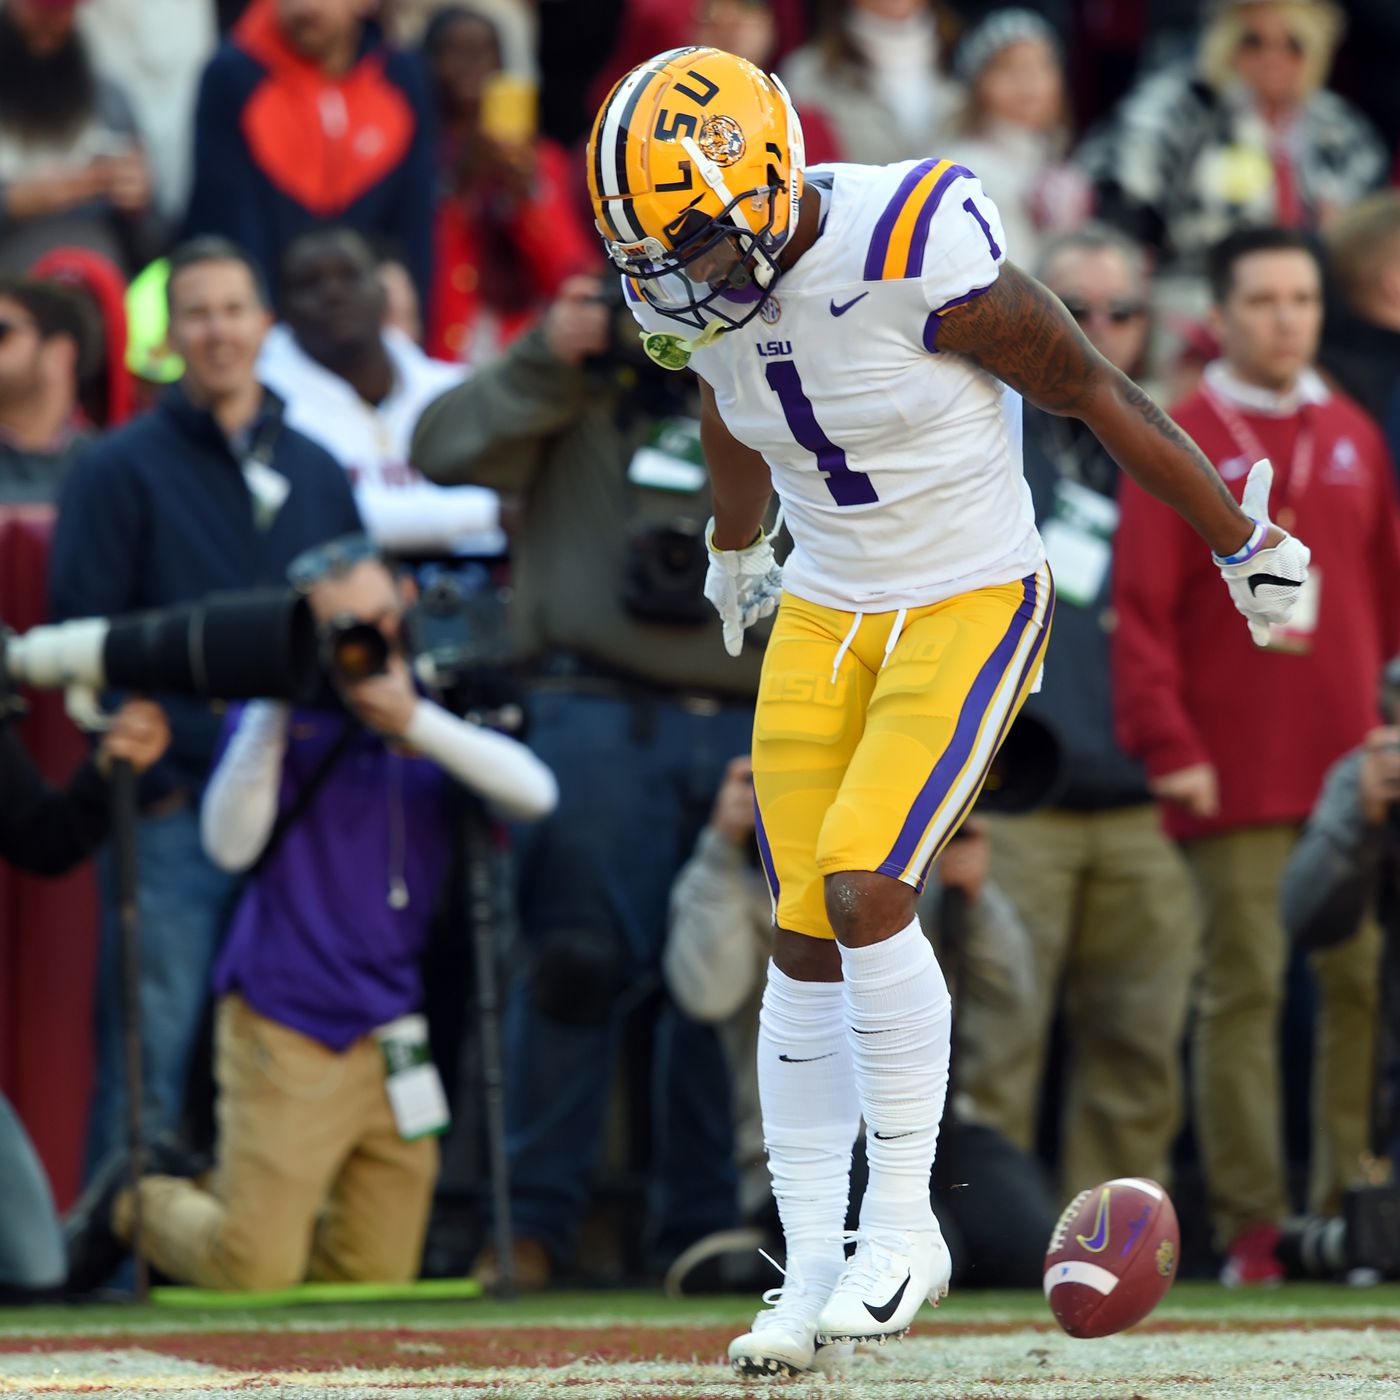 NFL Draft 2021: Ja'Marr Chase is the best LSU receiver prospect ever The Valley Shook